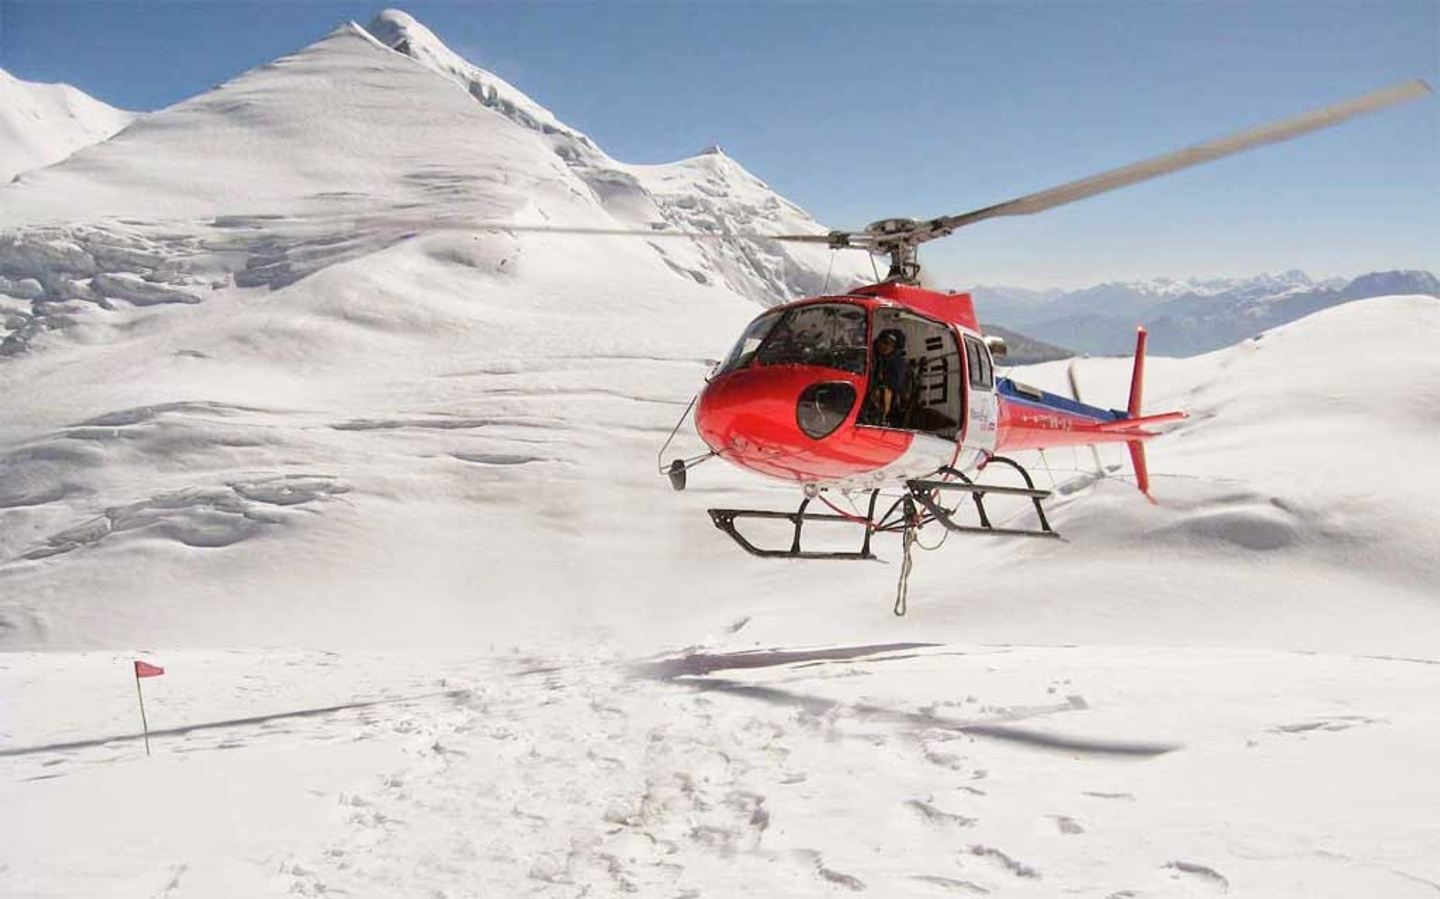 Everest Base Camp and back to Lukla by Helicopter - 12 Days